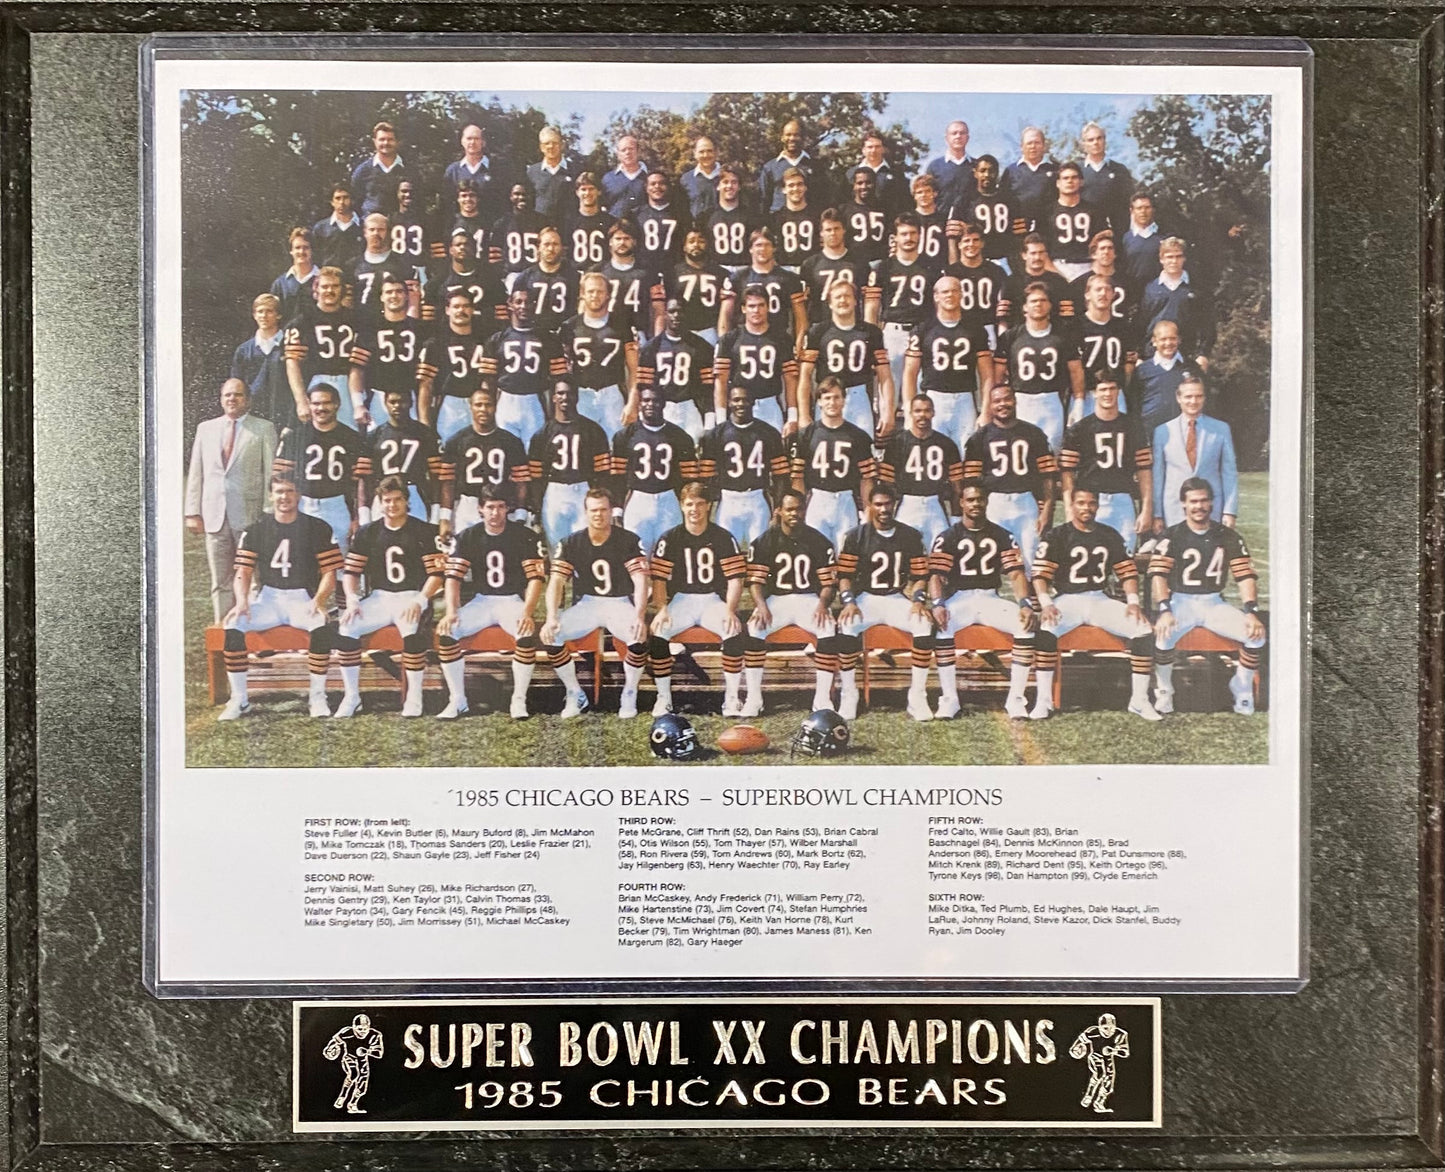 Super Bowl XX Champions 1985 Chicago Bears Wall Plaque